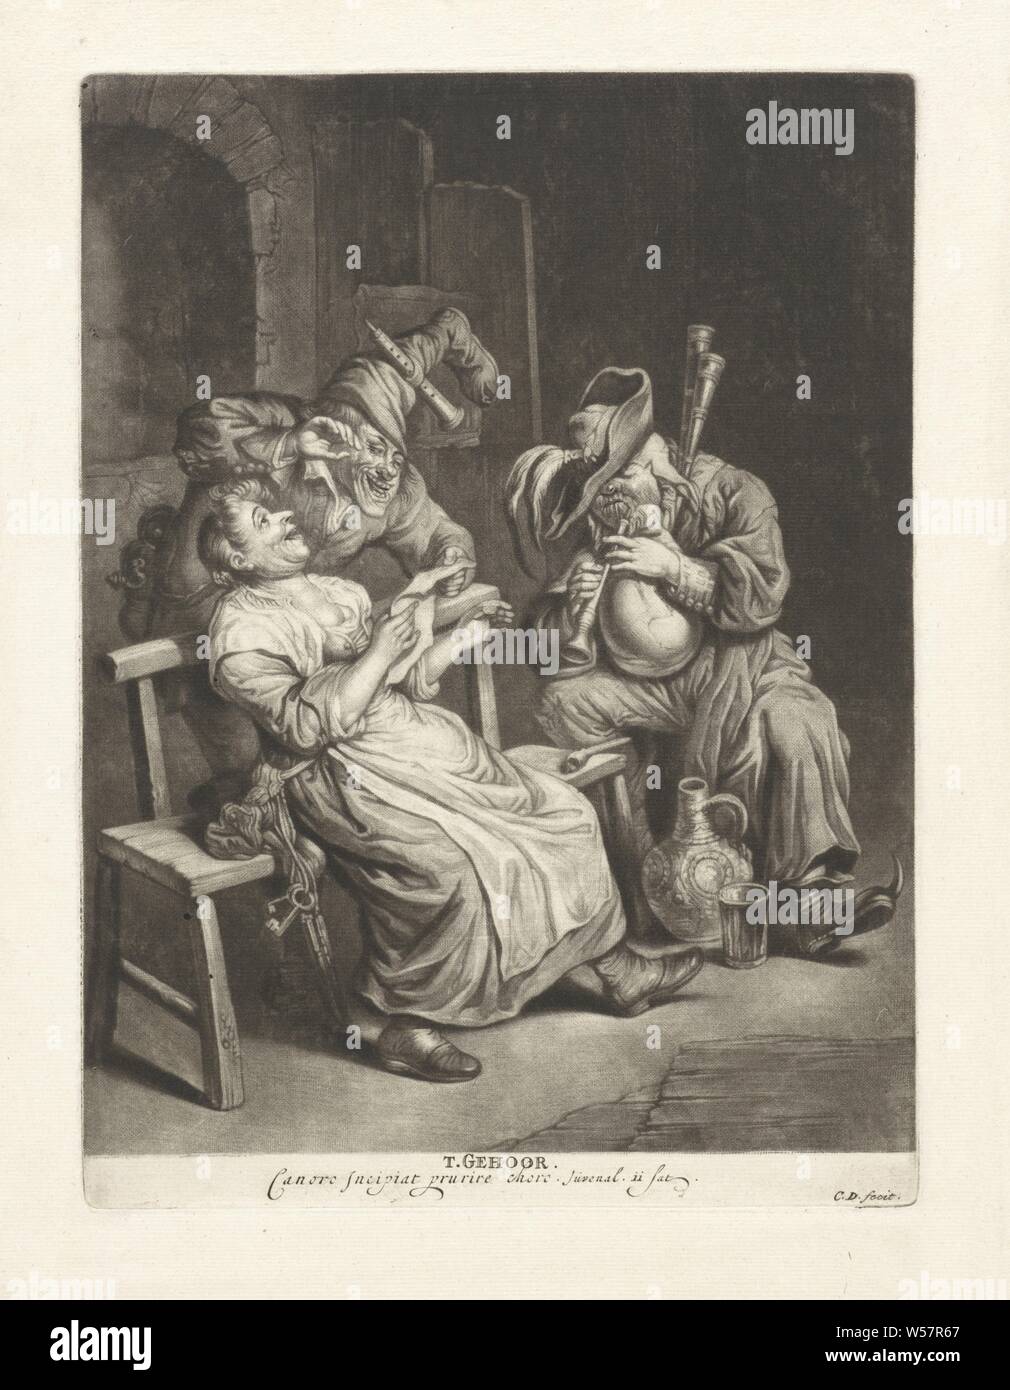 The hearing 'T Gehoor (title on object) The five senses (series title), A bagpipe player and a singing man and woman make music together. The man has an inverted boot on his head. The print is part of a series of five prints with the five senses, hearing, listening (one of the five senses), bagpipe, musette - CC - out of doors, vocal music, singing, Cornelis Dusart (mentioned on object), Haarlem, 1670 - 1704, paper, engraving, h 249 mm × w 183 mm Stock Photo